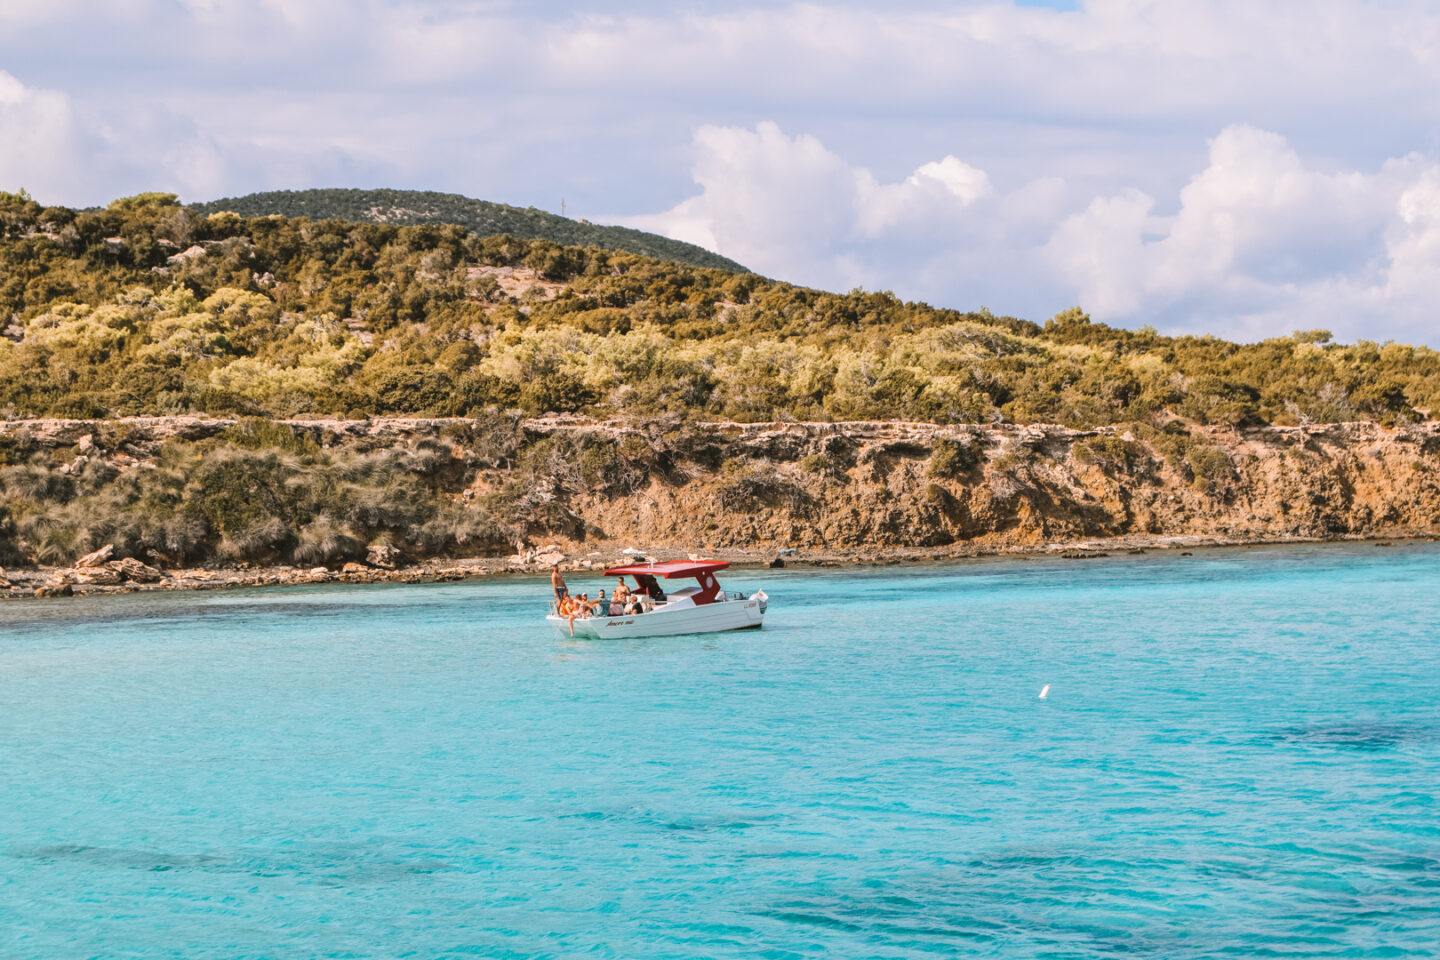 Is there Uber in Cyprus? A boat on the Blue Lagoon, Cyprus